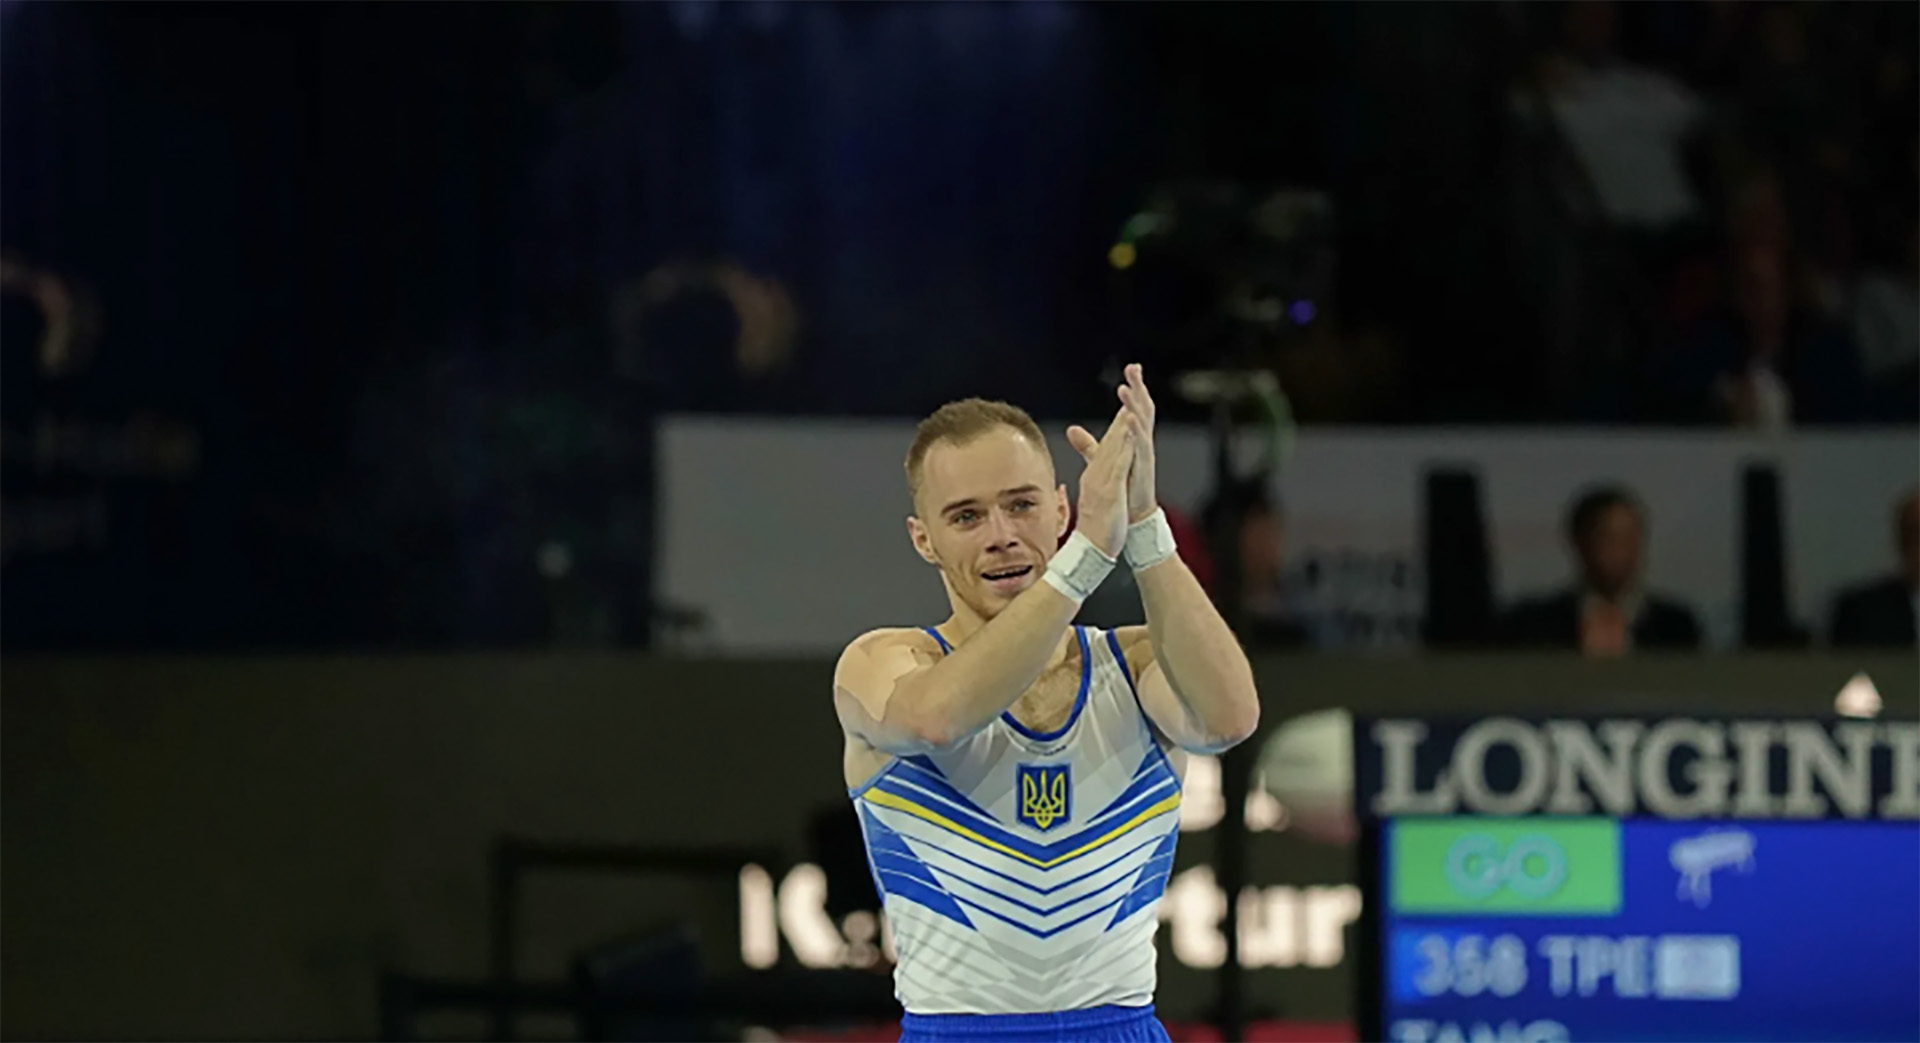 In addition to the gold medal in parallel, Verniaiev was the All Around Olympic runner-up in Rio 2016.